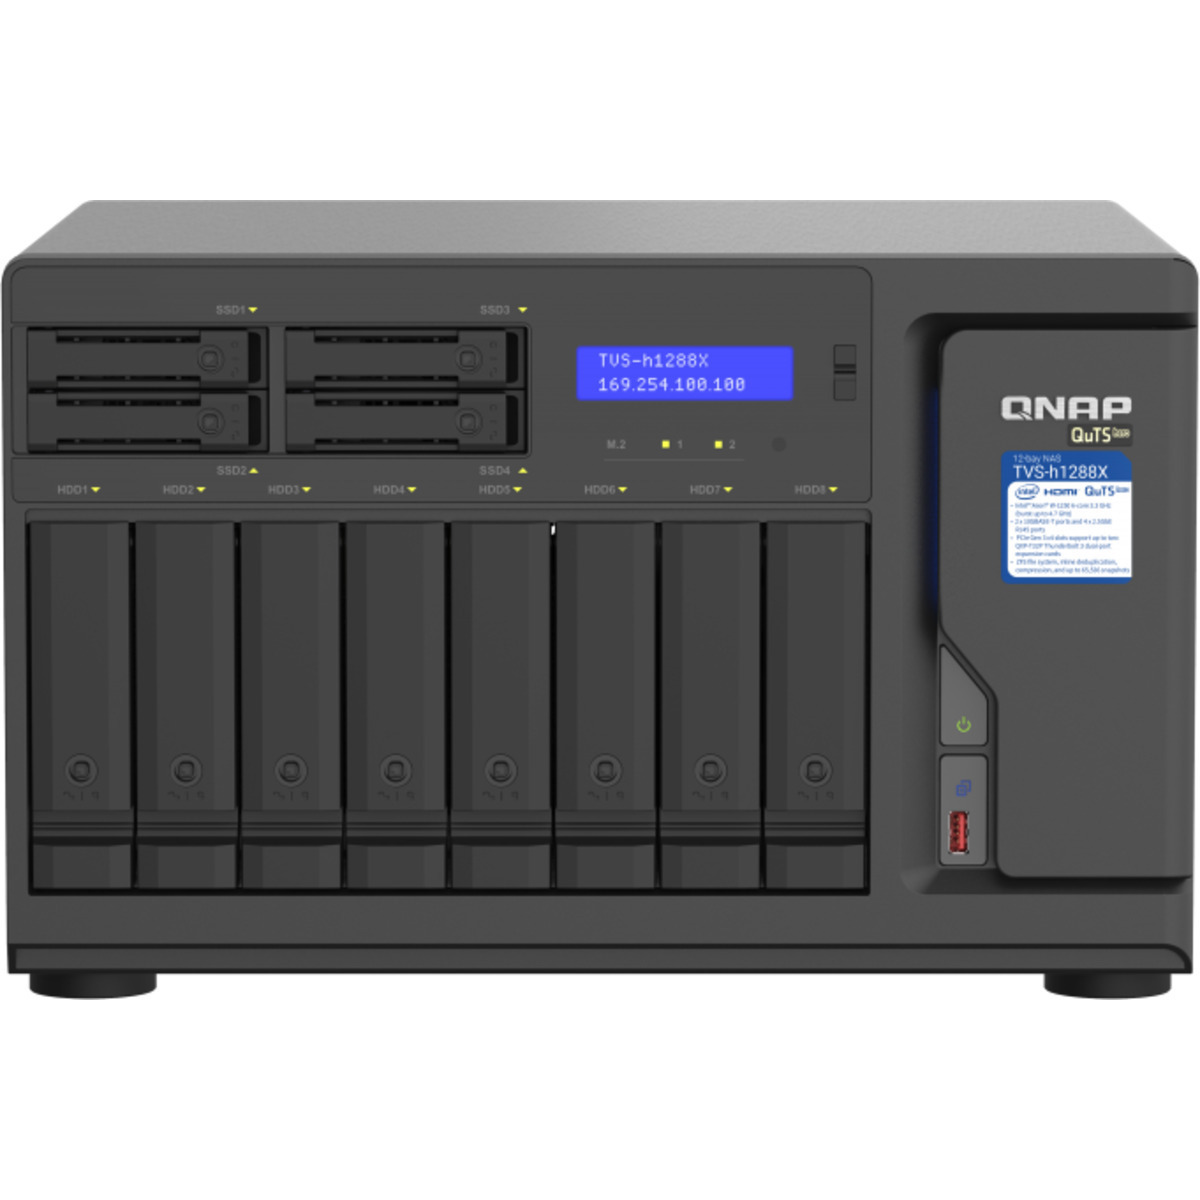 QNAP TVS-h1288X QuTS hero NAS 32tb 8+4-Bay Desktop Multimedia / Power User / Business NAS - Network Attached Storage Device 4x8tb Seagate IronWolf ST8000VN004 3.5 7200rpm SATA 6Gb/s HDD NAS Class Drives Installed - Burn-In Tested TVS-h1288X QuTS hero NAS